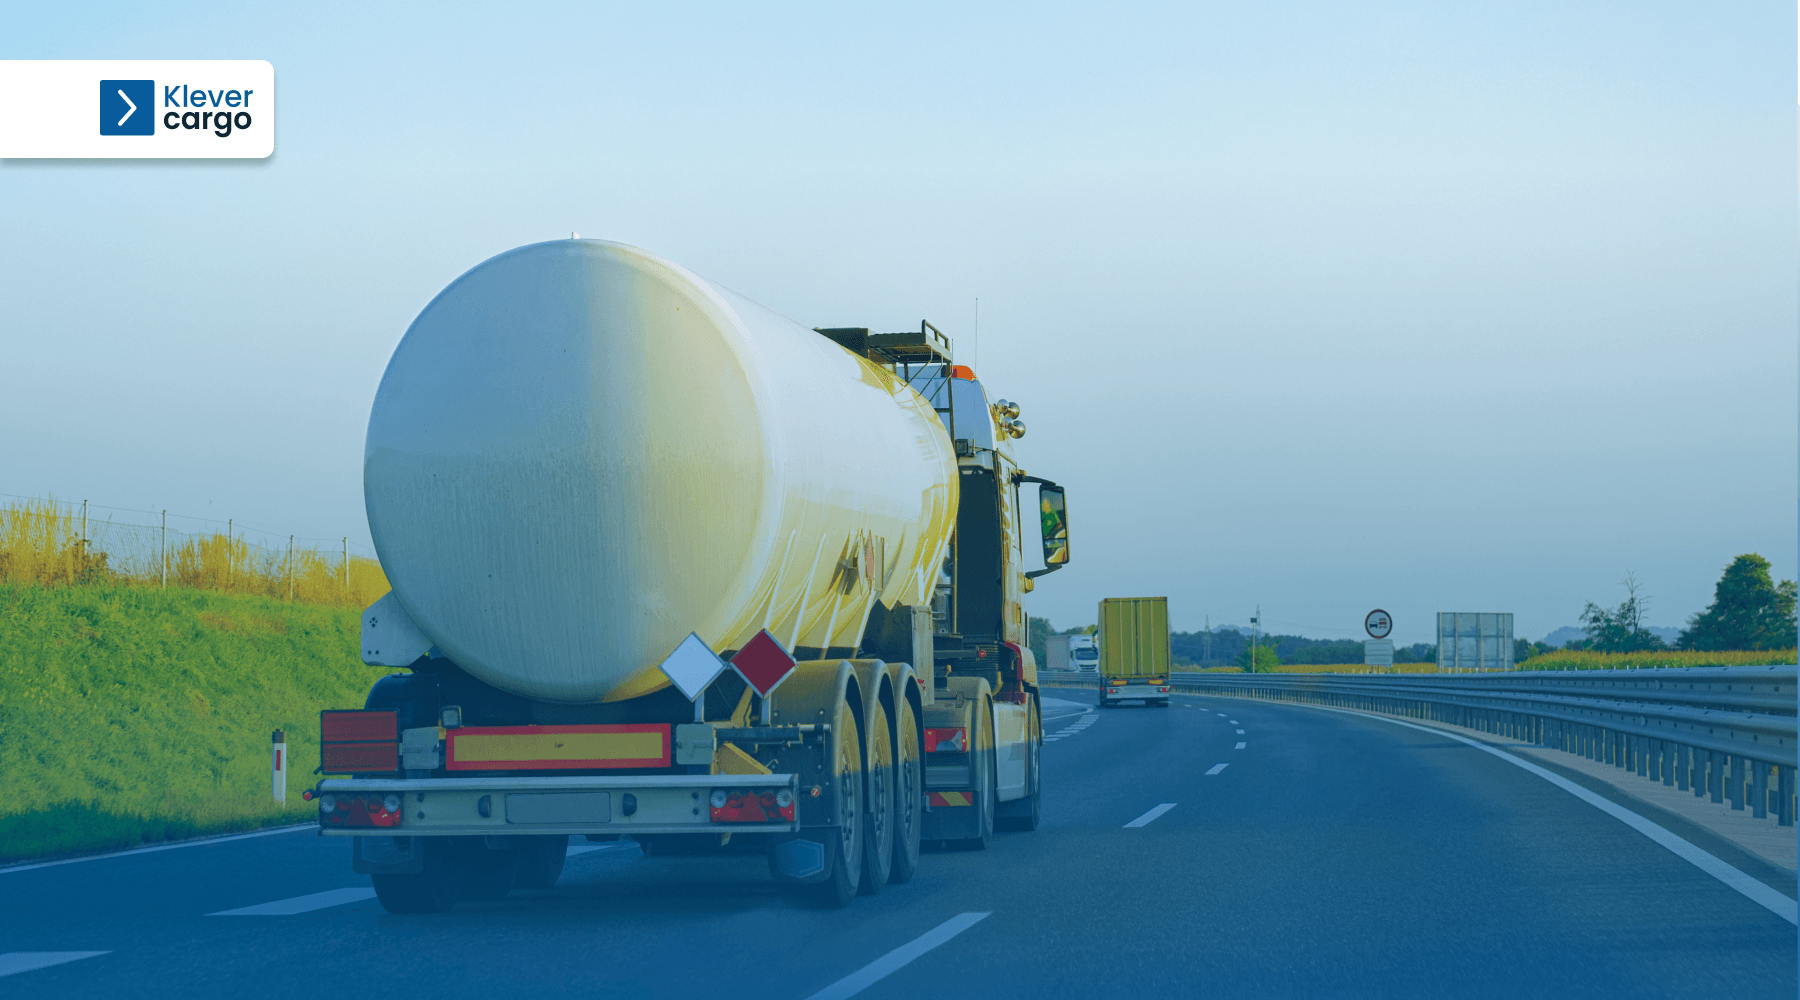 Vehicle and equipment requirements for transporting dangerous goods